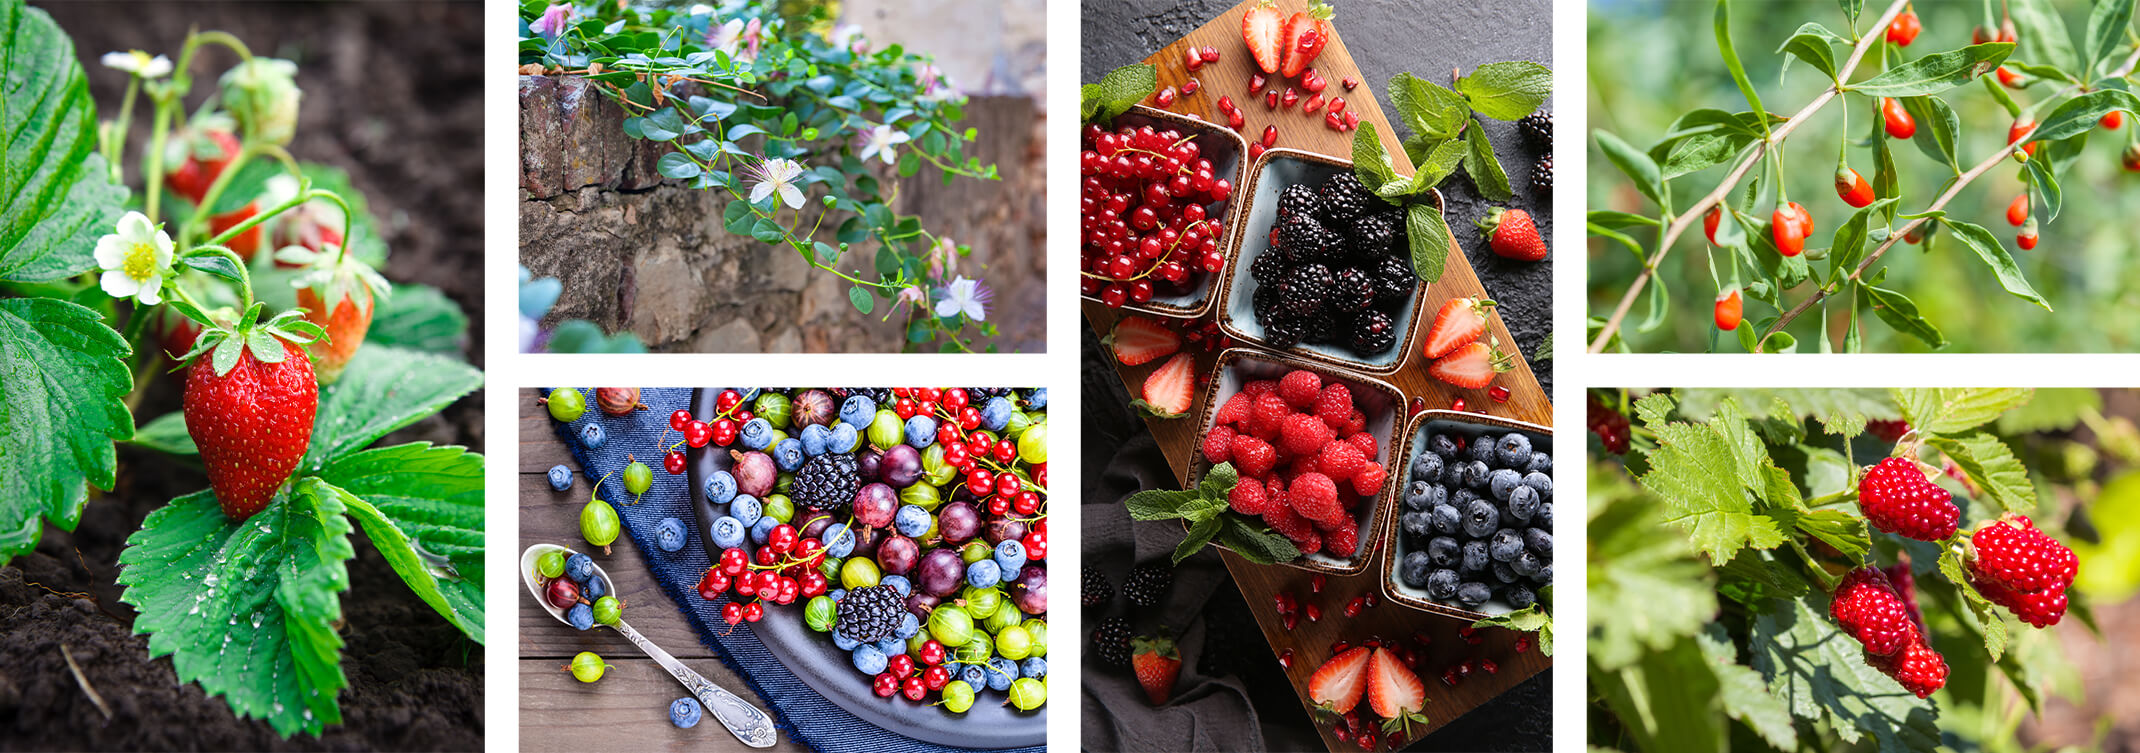 6 images: Strawberries growing in the ground; Caper berries growing over a stone wall; a blue plate on a navy papkin on a wooden table near a spoon--plate and spoon have a variety of berries on them; 4 square bowls on a cutting board on a black table -- each bowl with different berries--Red currants, blackberries, raspberries and blueberries--with sliced strawberries and pomagranate seeds on the table and a napkin; a goji berry shrub; and a loganberry bush